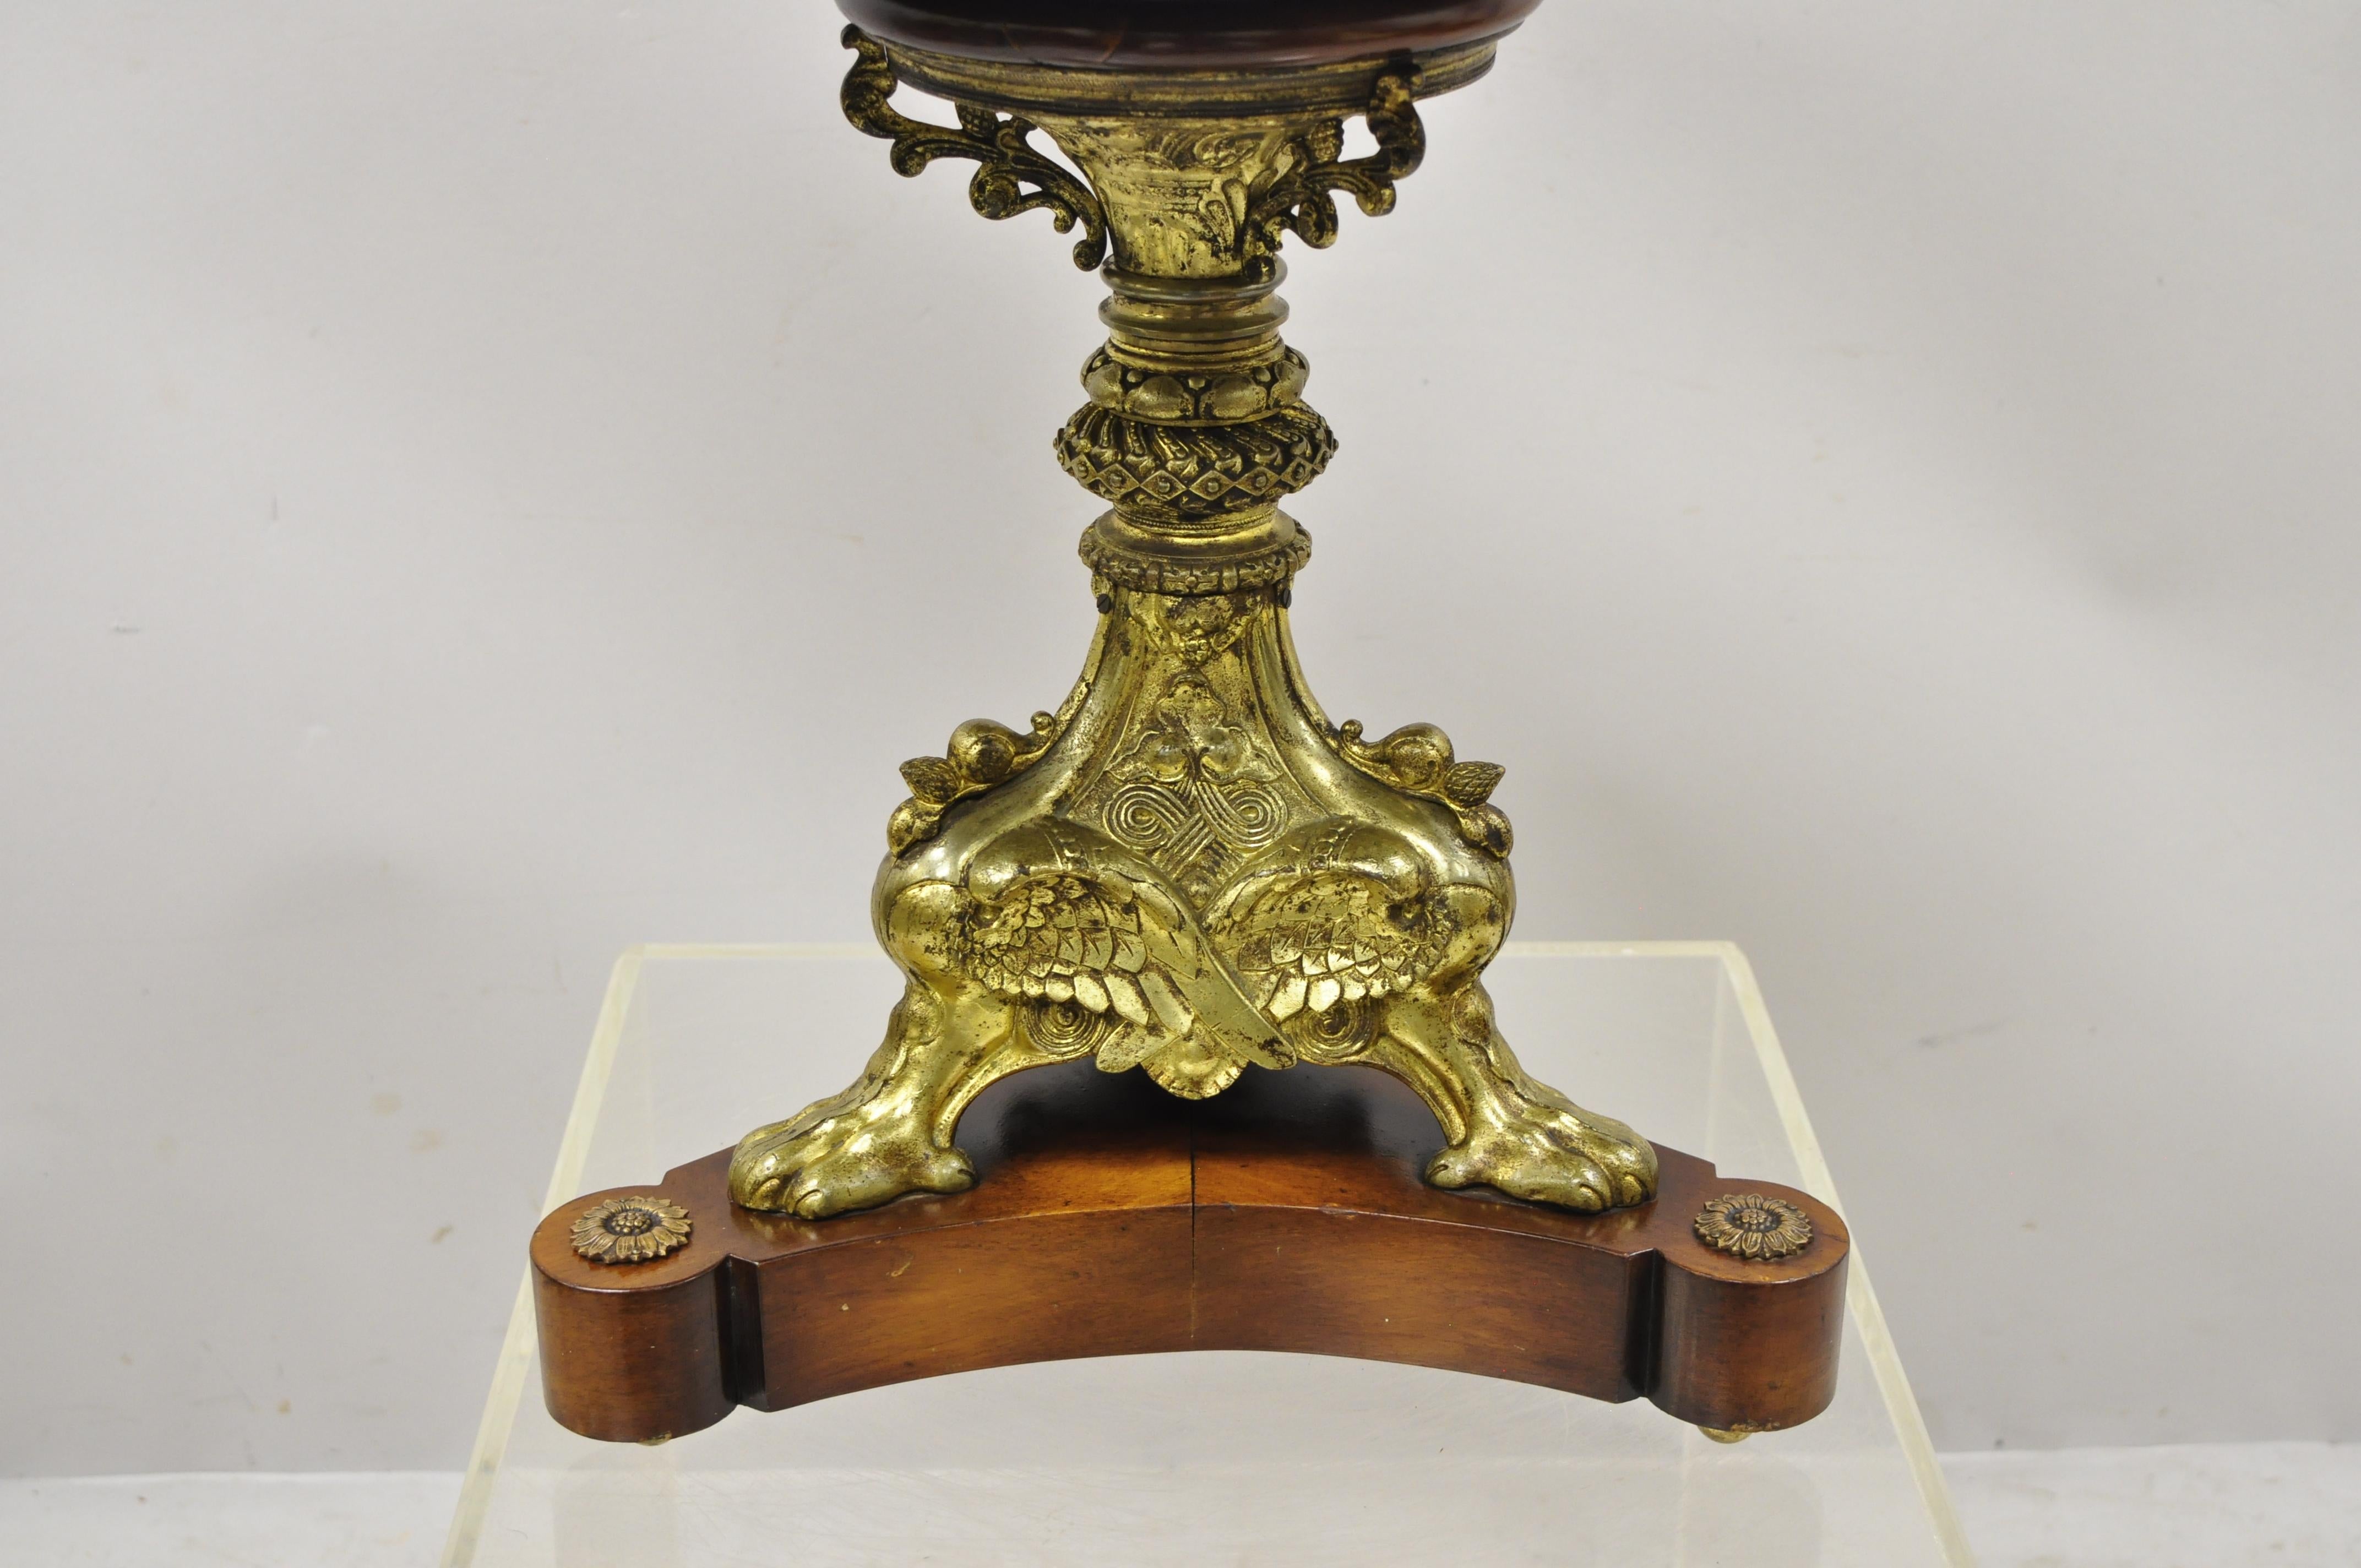 Antique French Empire bronze figural swans paw feet pedestal base round low side table. Item features ornate bronze pedestal base with swans and paw feet, beautiful wood grain, very nice antique item, quality craftsmanship, great style and form.